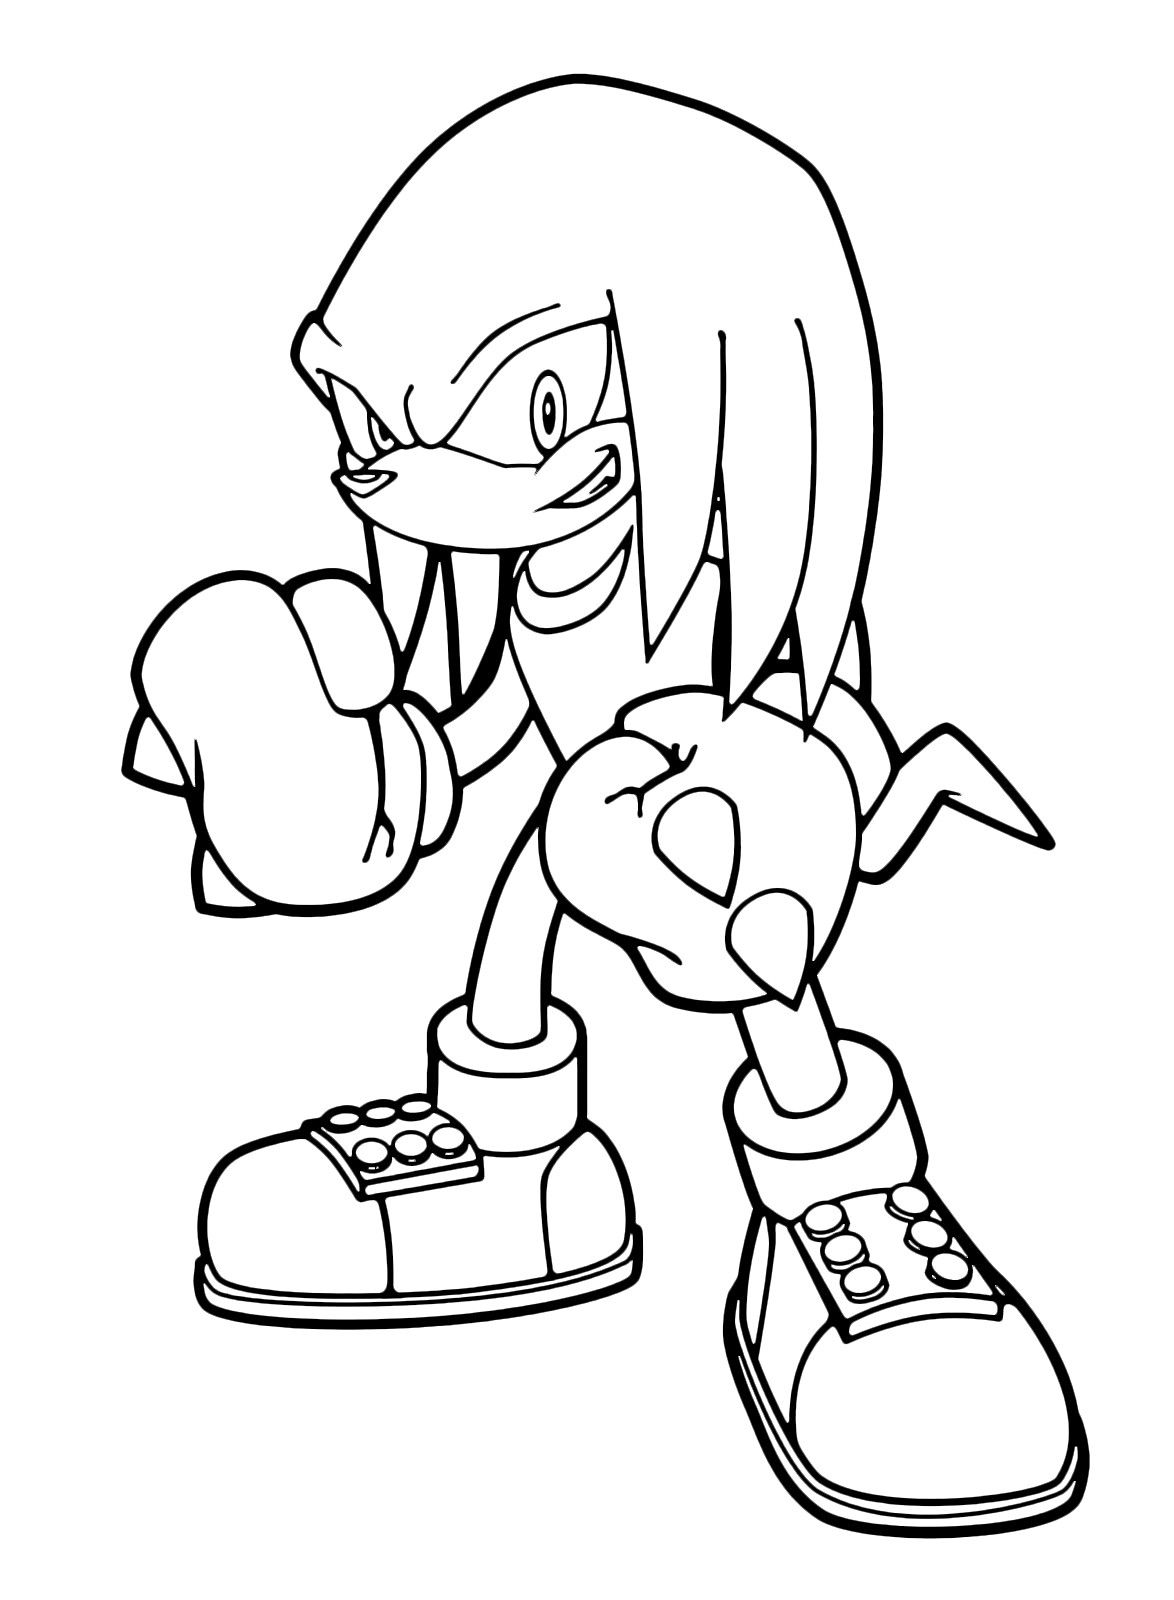 Knuckles | Coloring pages, Hedgehog colors, Printable coloring pages